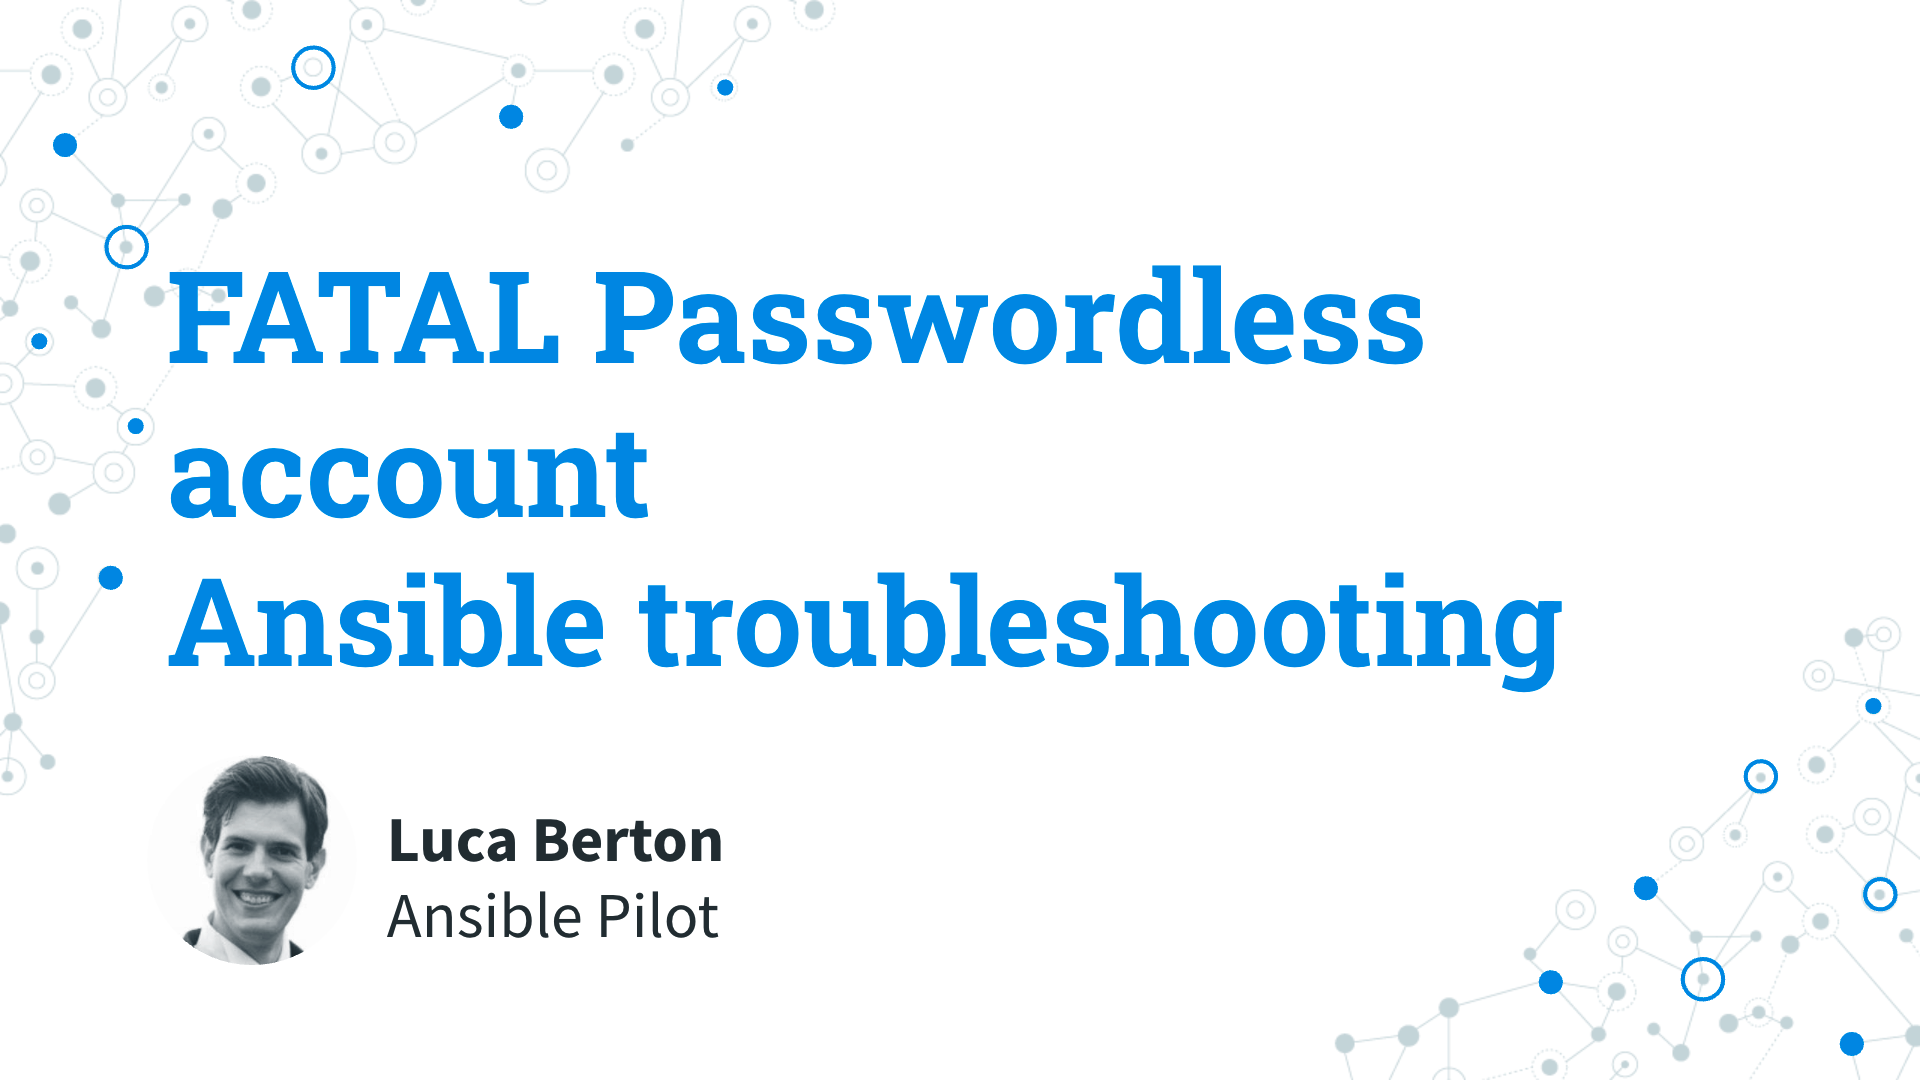 Ansible troubleshooting - passwordless account